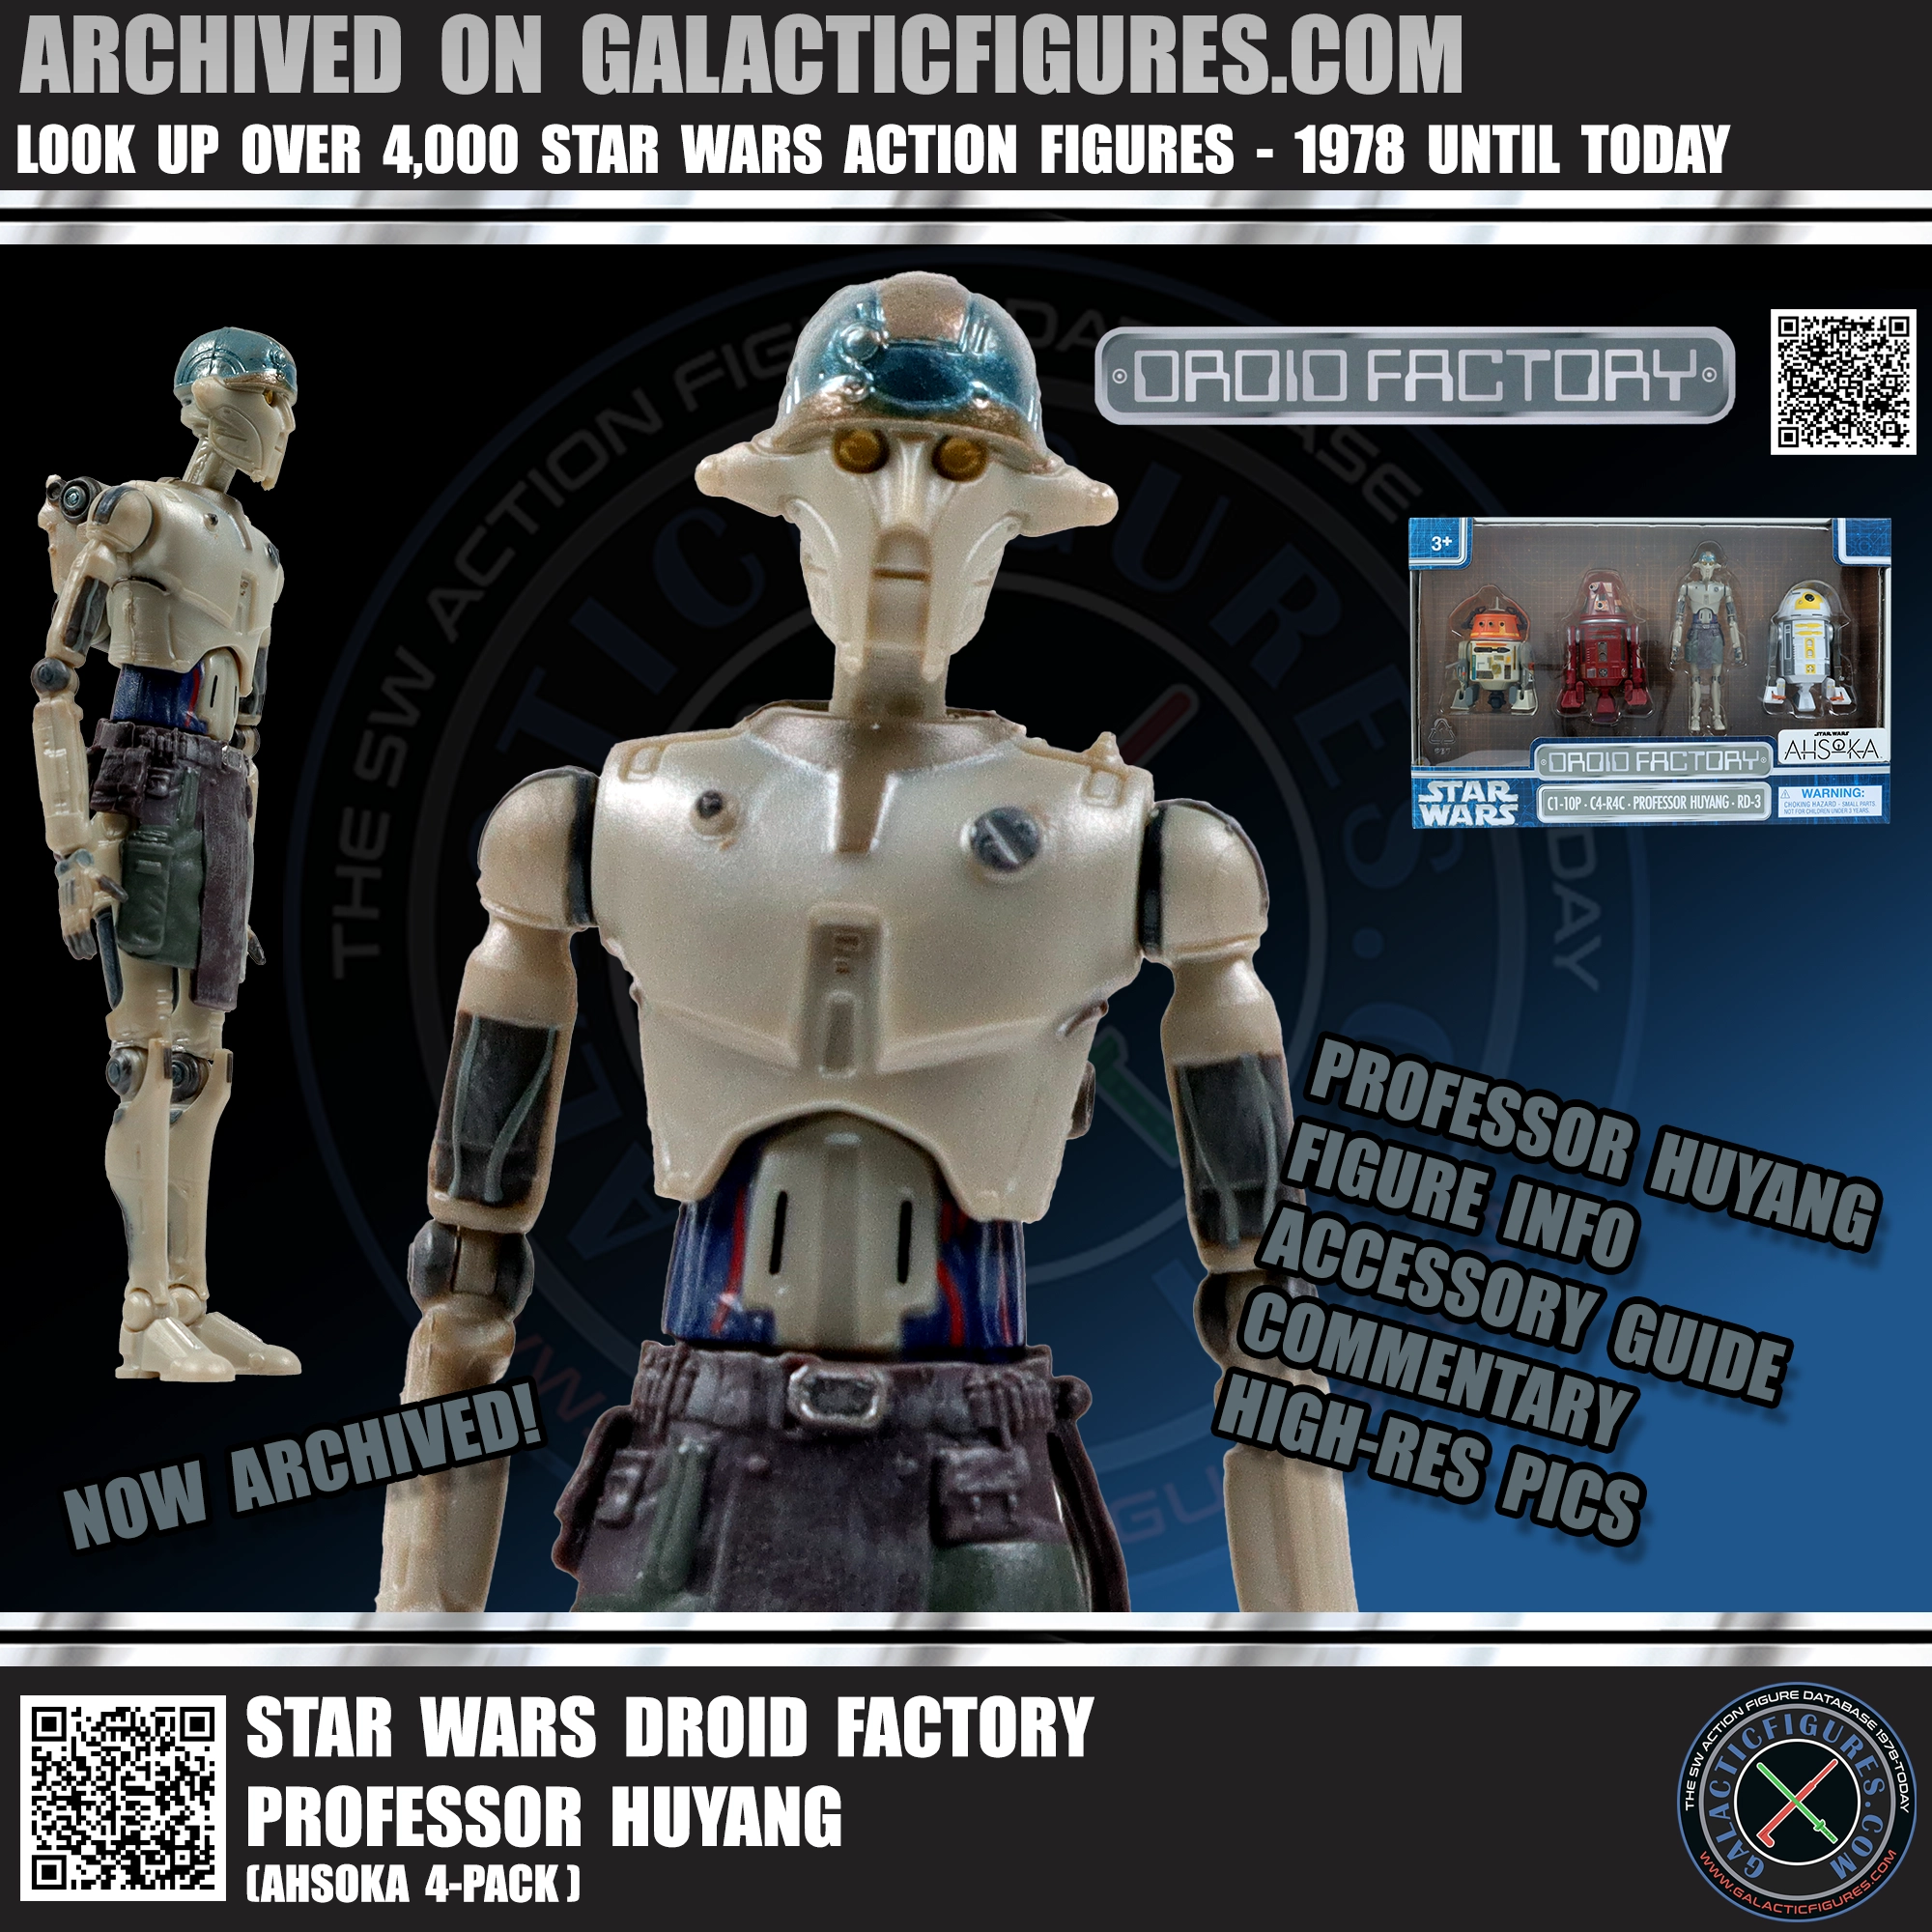 Disney Droid Factory Professor Huyang Archived!